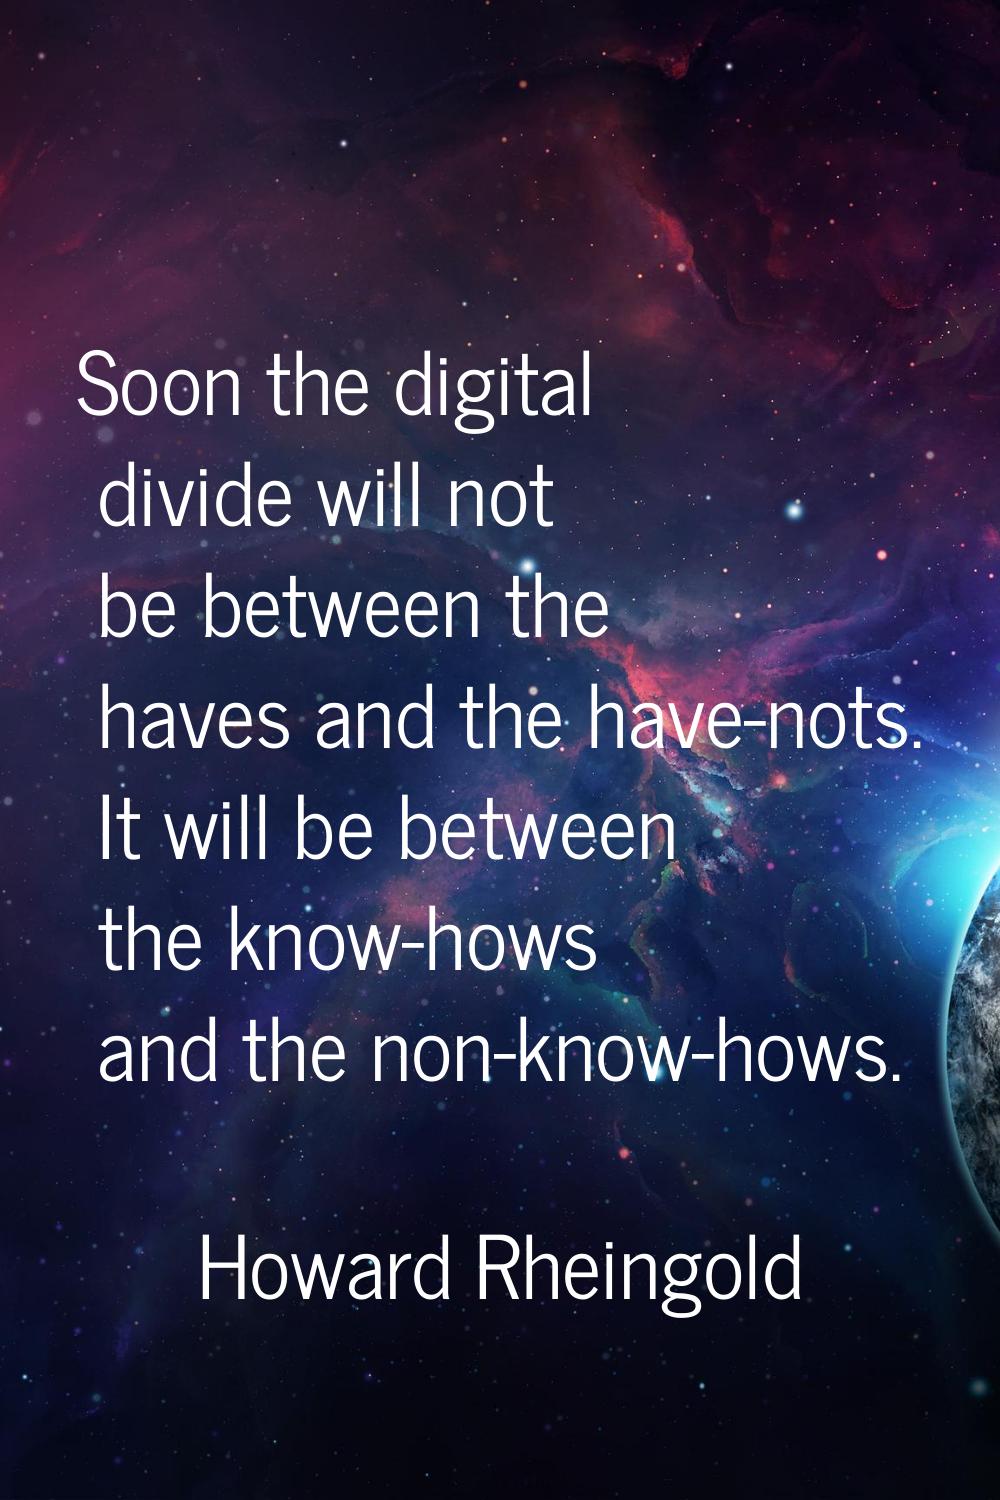 Soon the digital divide will not be between the haves and the have-nots. It will be between the kno